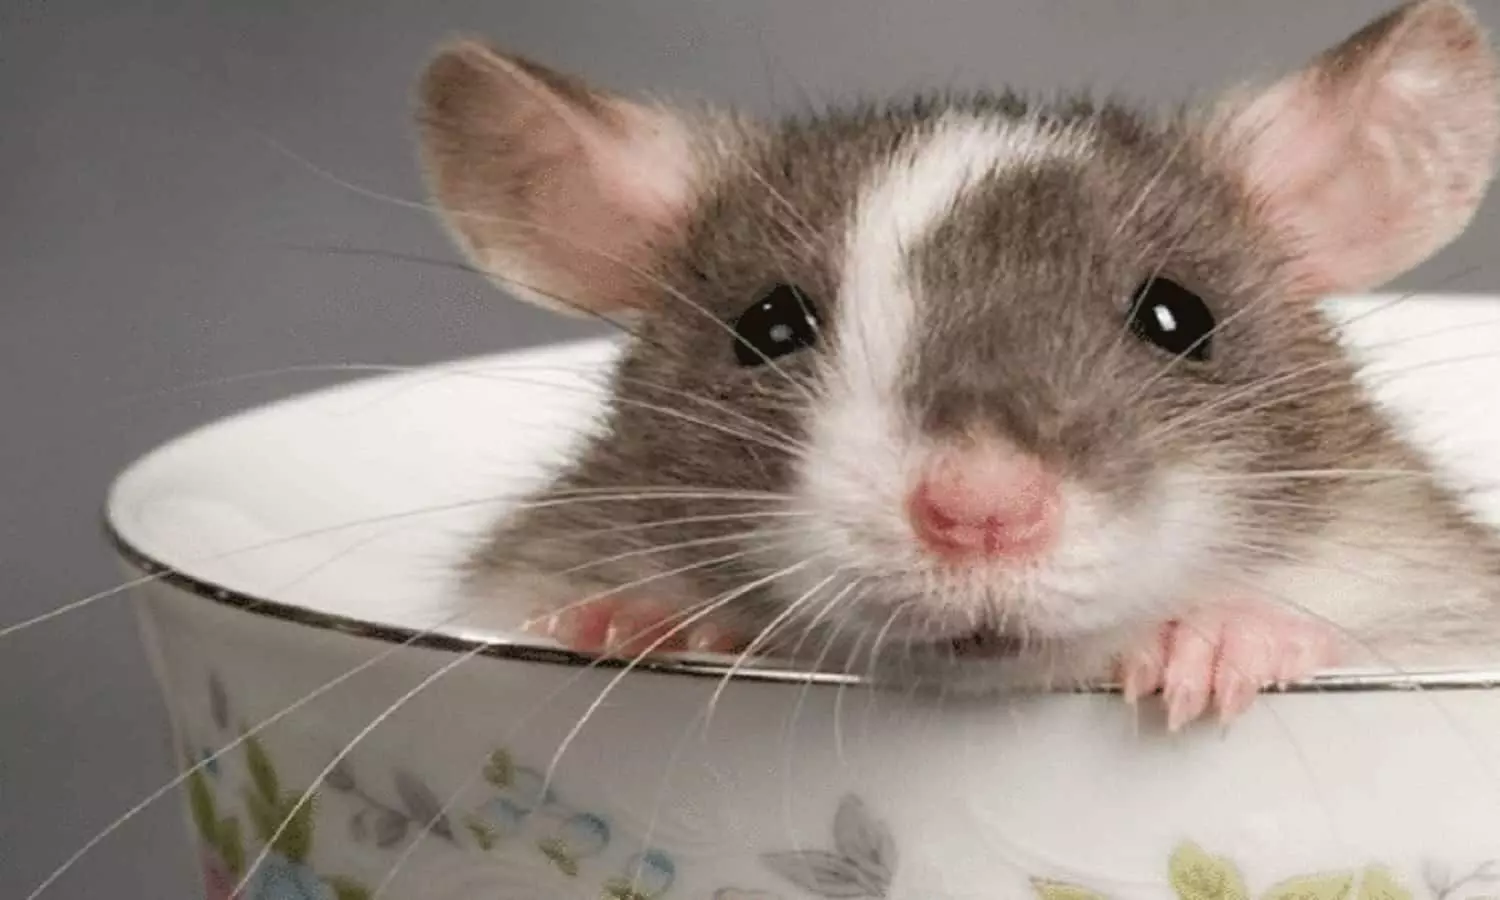 Home Remedies To Get Rid Of Rats